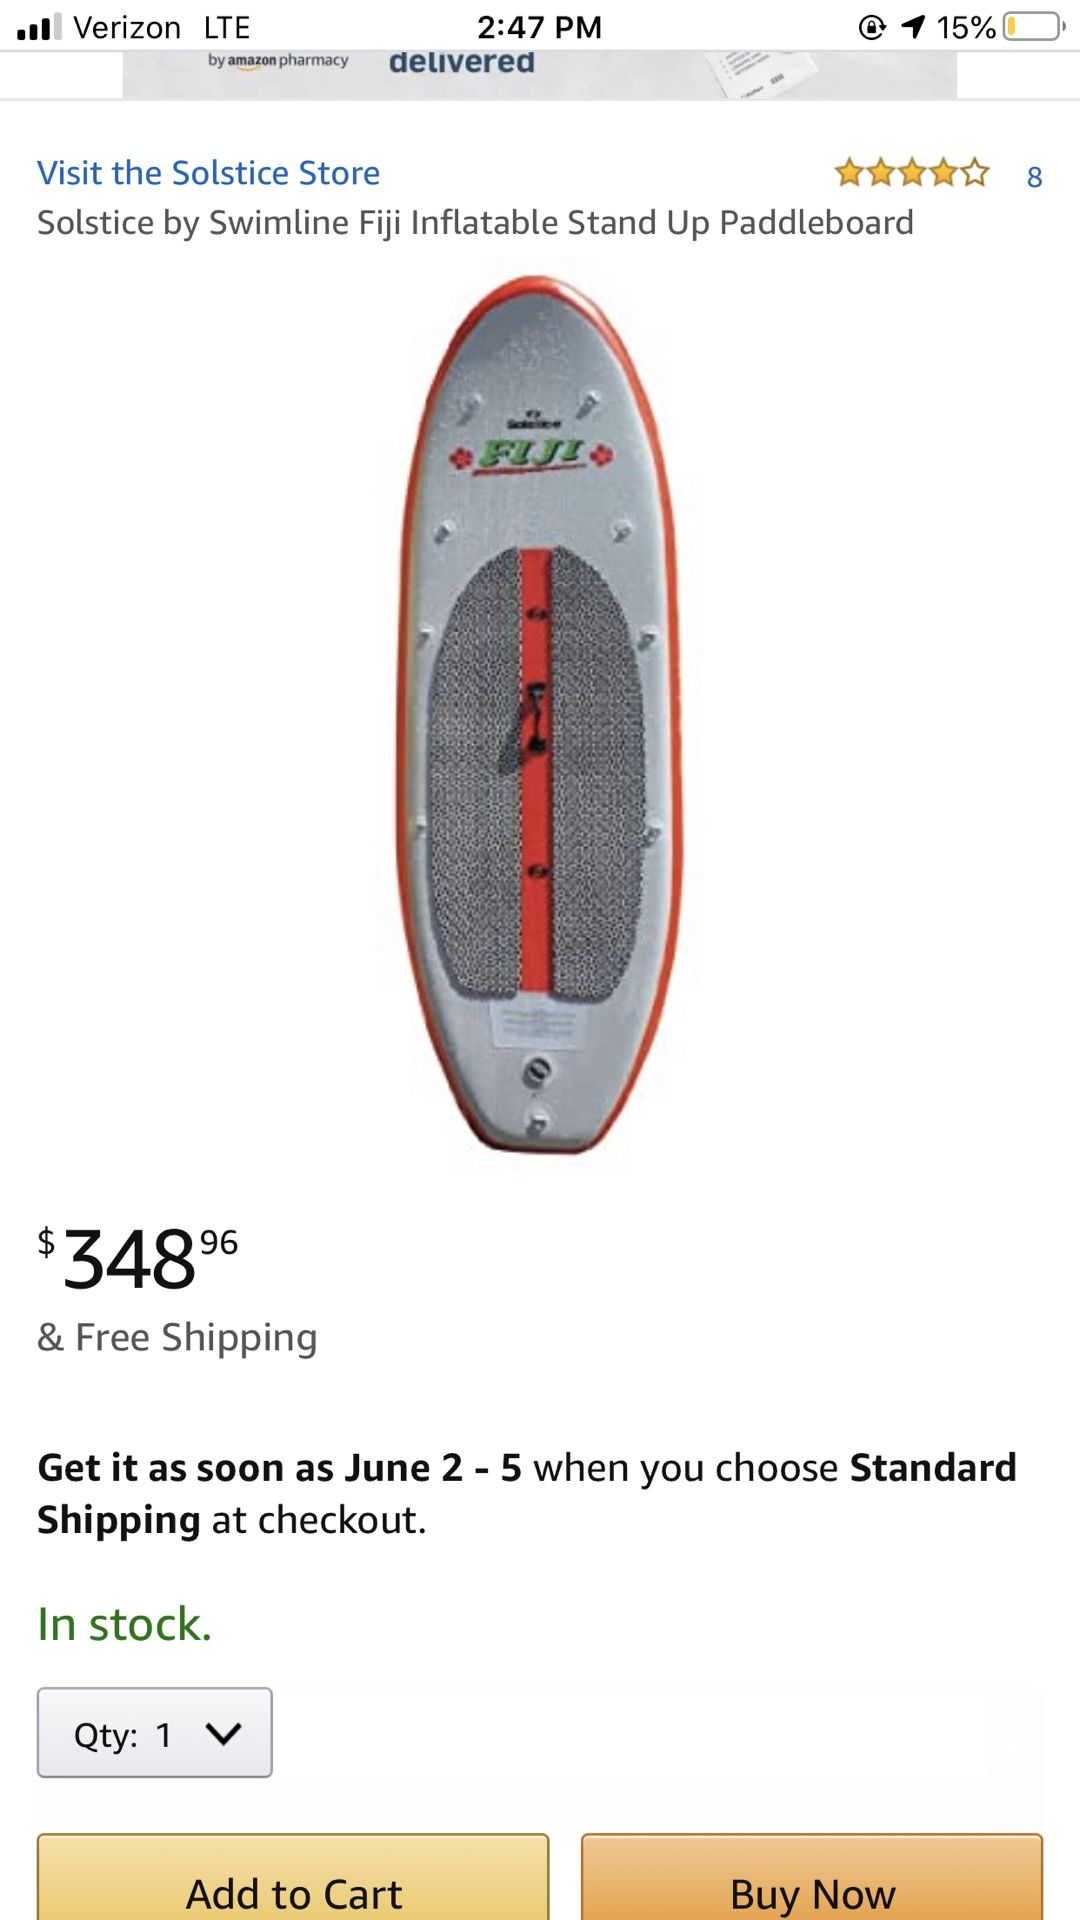 Solstice Fiji inflatable paddle board